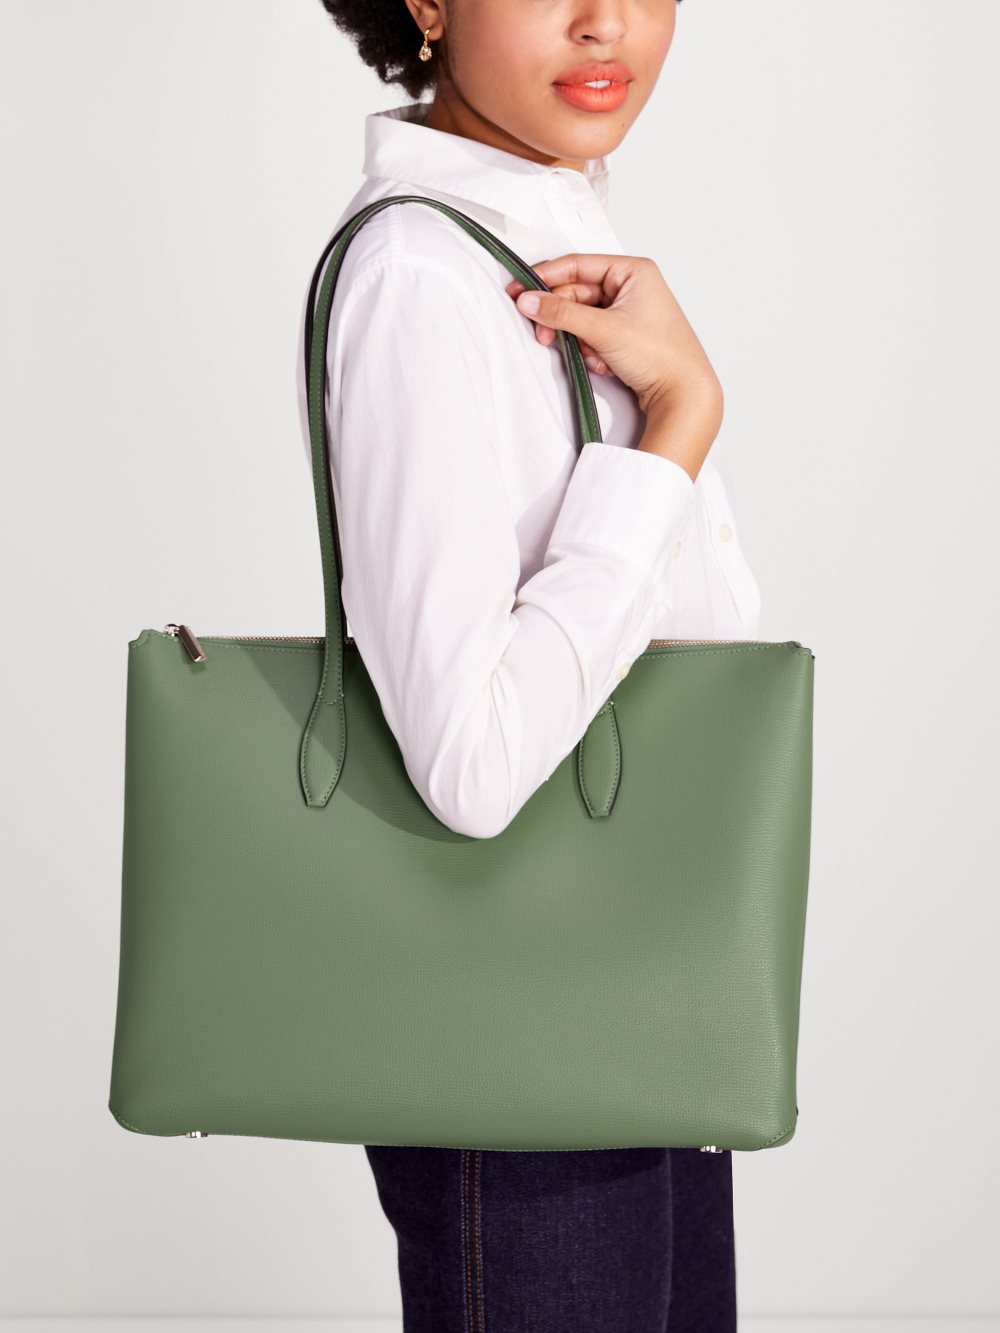 Women's romaine all day large zip-top tote | Kate Spade